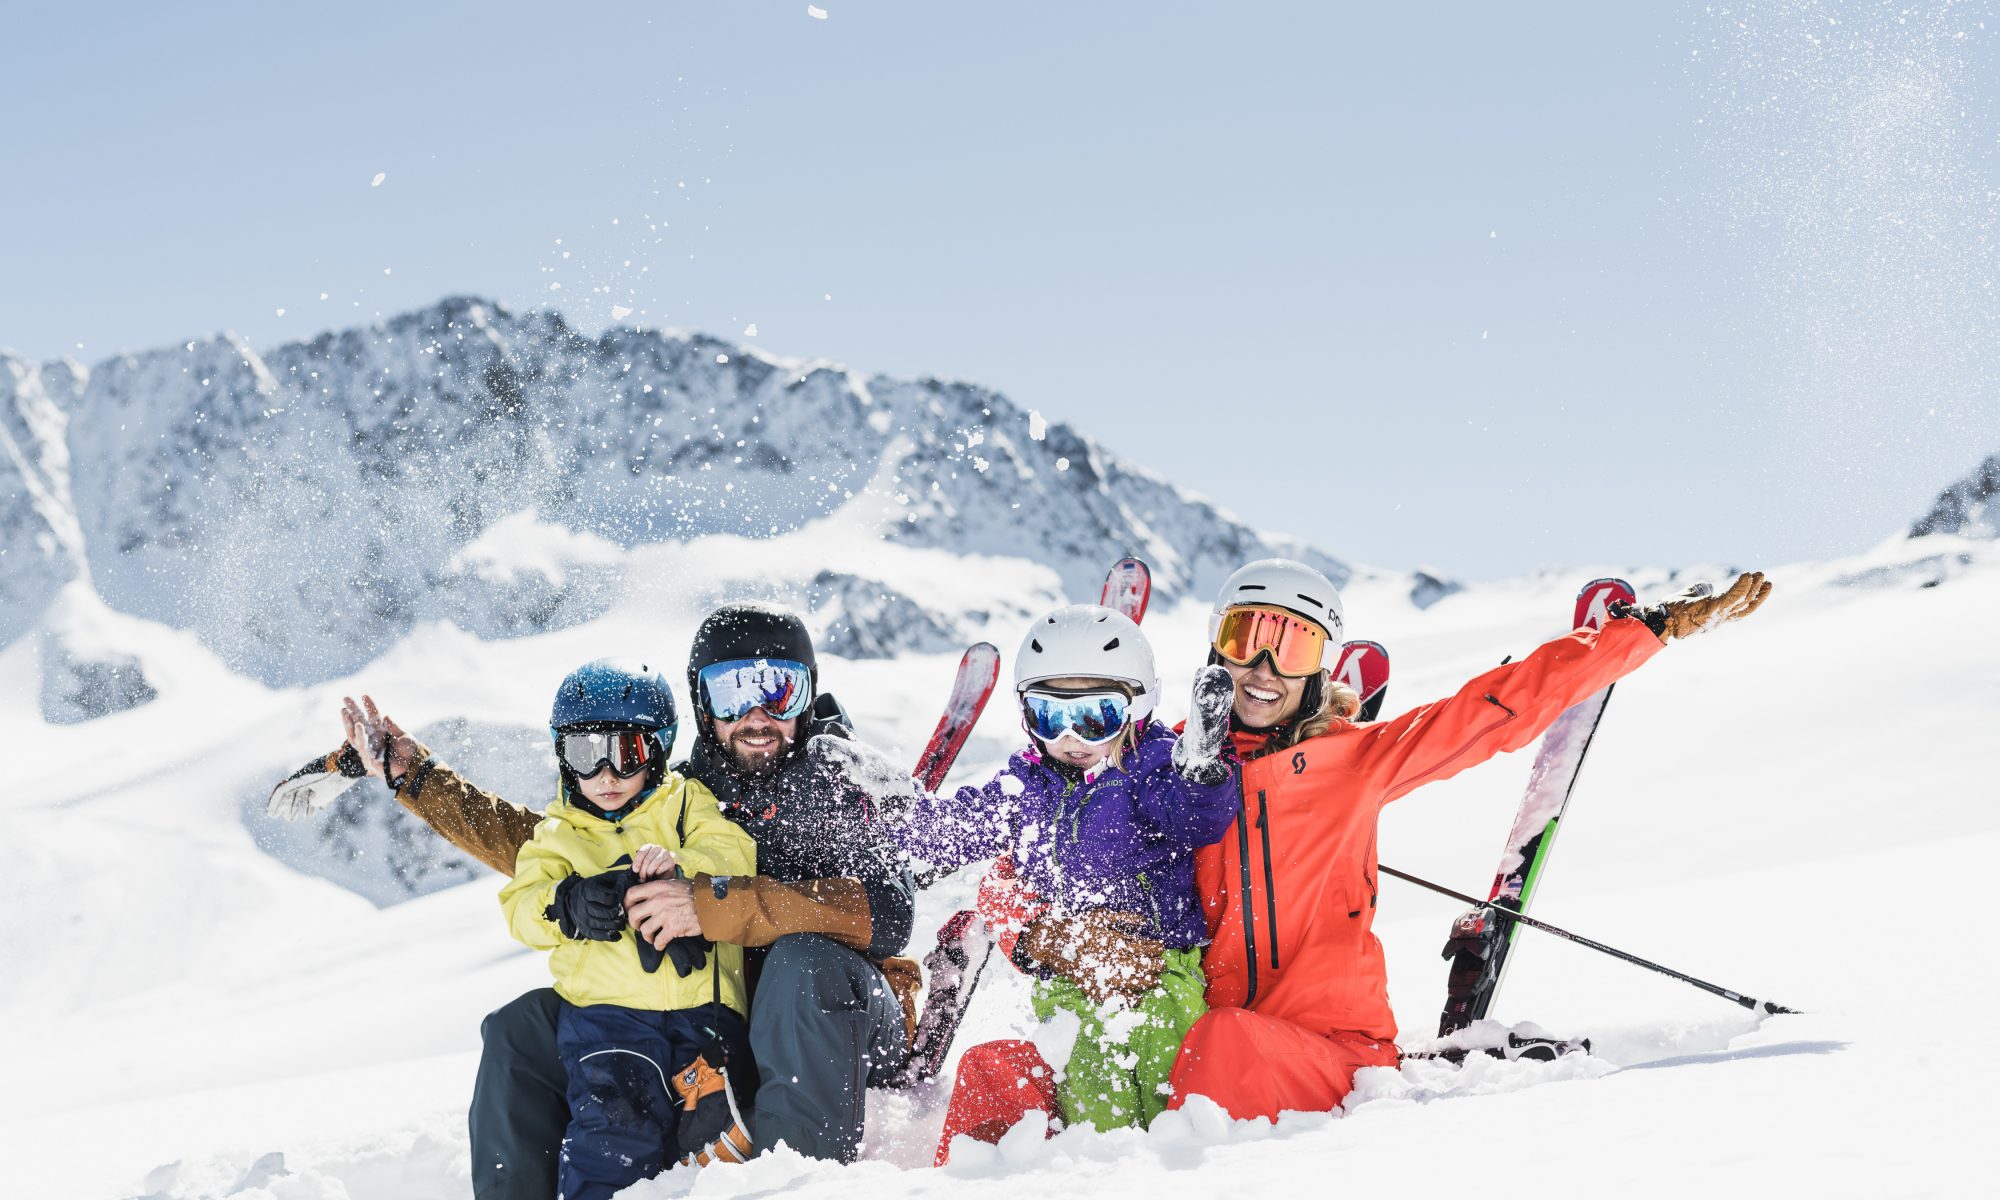 It's well known already that kids up to ten years of age do not pay for a skipass in Stubai! Why Stubaital is a great region for the entire family. Photo: Stubaier-Tirol Werbung.